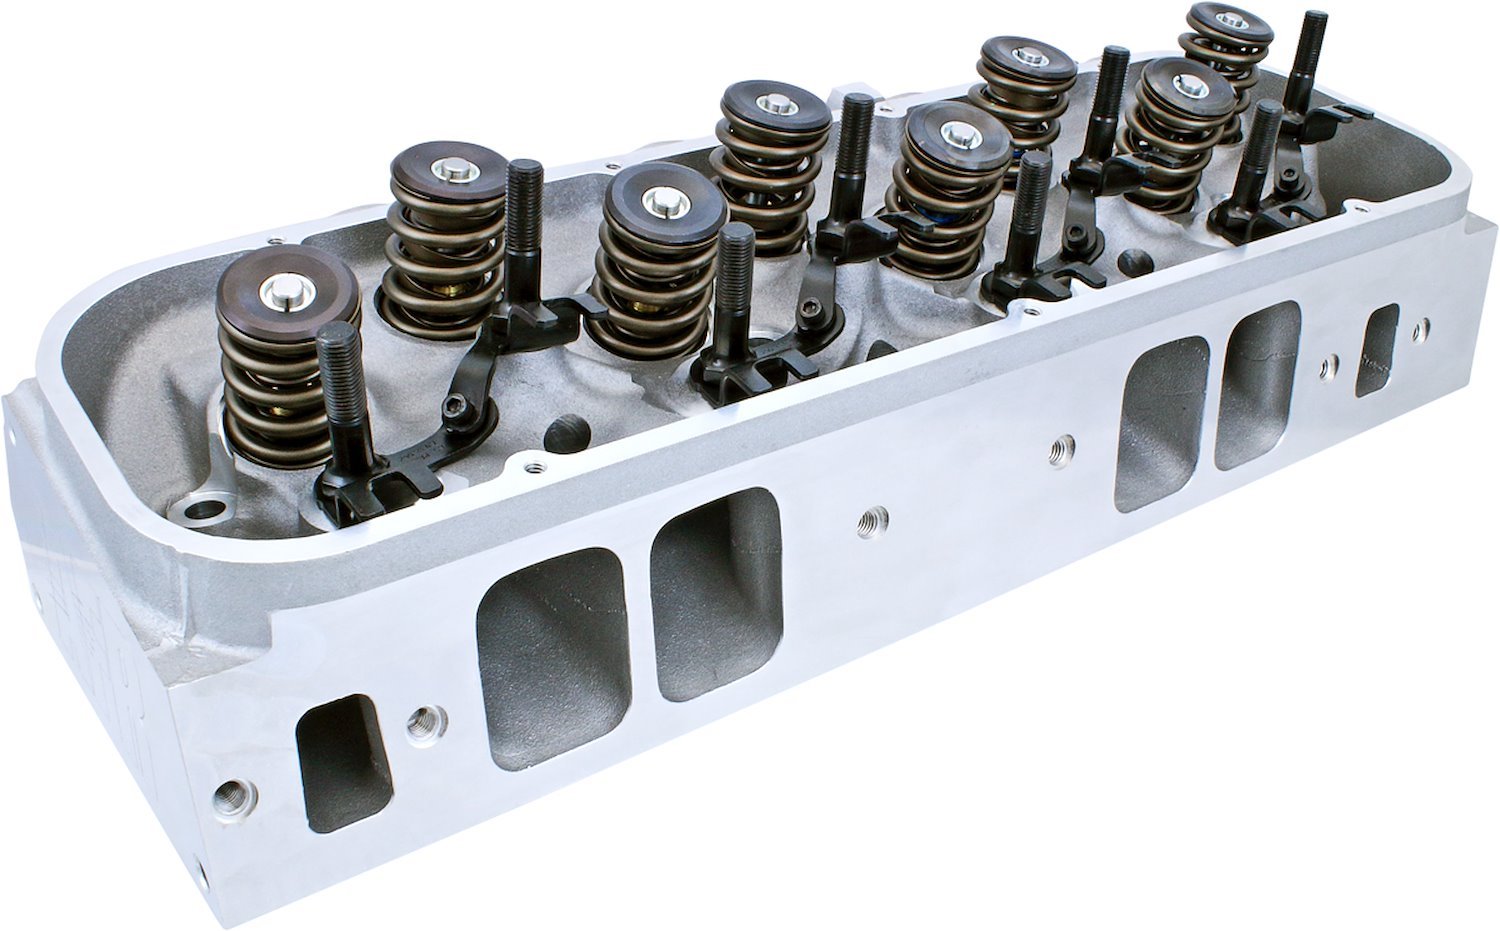 AFR 3001: Fully Assembled 325cc Enforcer Cylinder Head | Big Block Chevy |  122cc Combustion Chamber | 24°/4° Intake, 15°/4° Exhaust Valve Angles |  A356 Aluminum | Sold Individually - JEGS High Performance